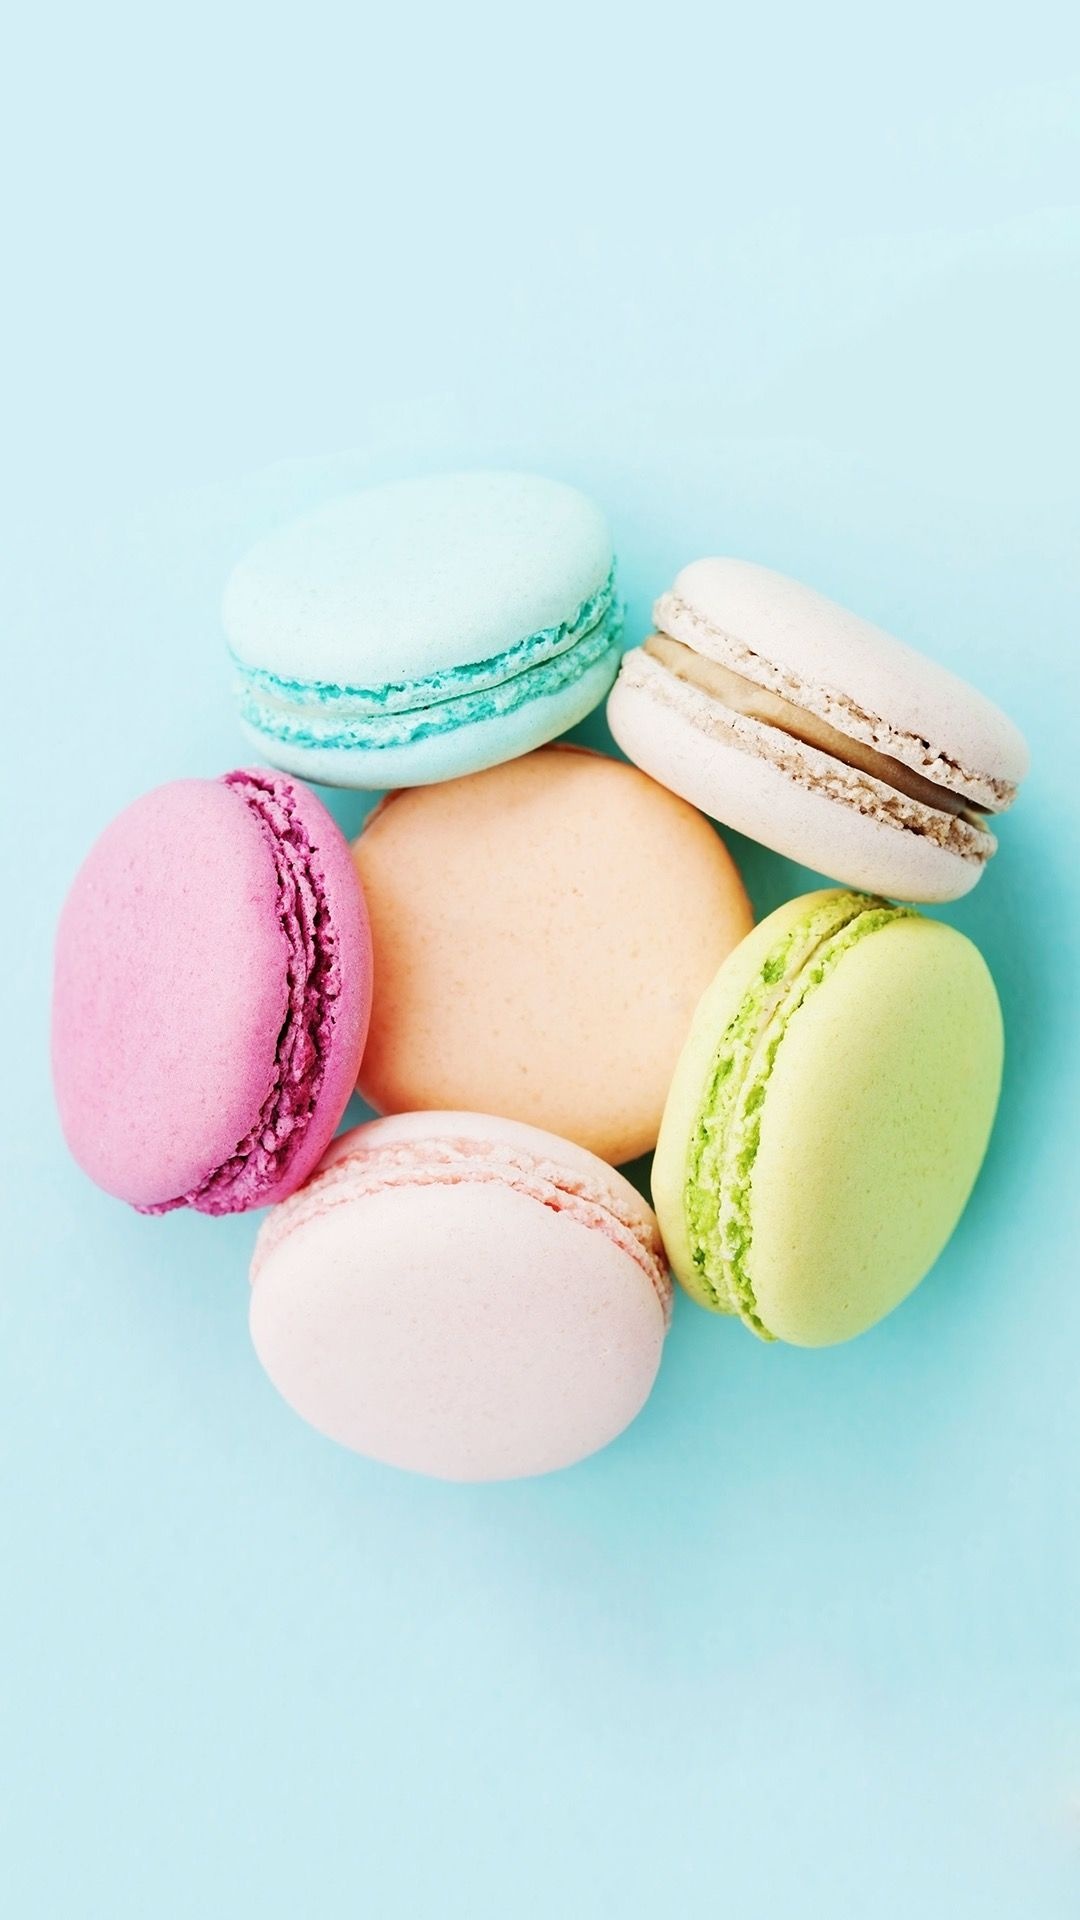 Macaron: National Macaron Day, introduced by famed French confectionery house Pierre Herme. 1080x1920 Full HD Wallpaper.